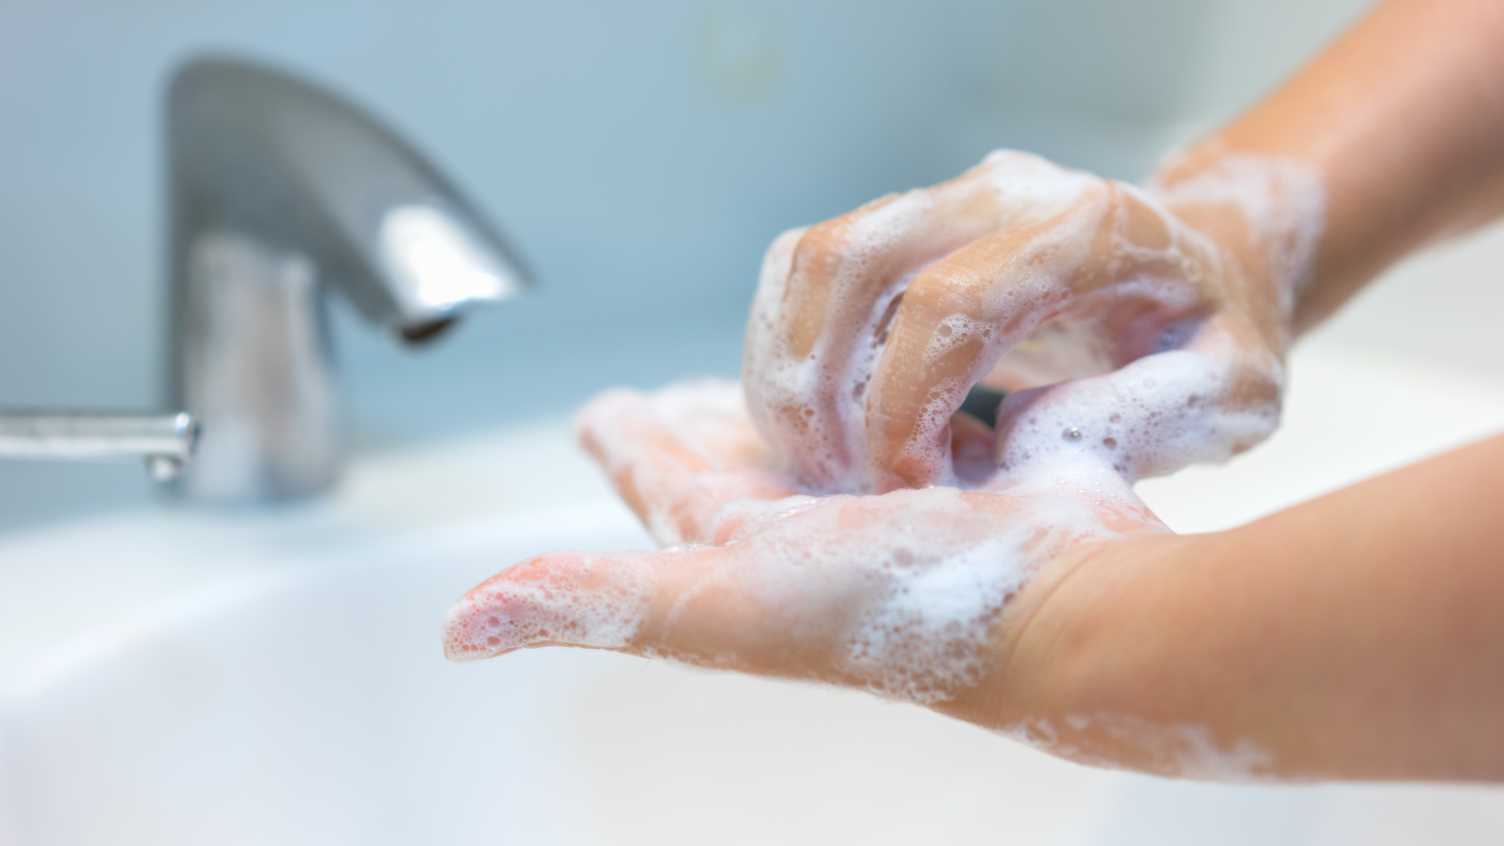 Thumbnail for Gentle cleansers kill viruses as effectively as harsh soaps, study finds  | New…